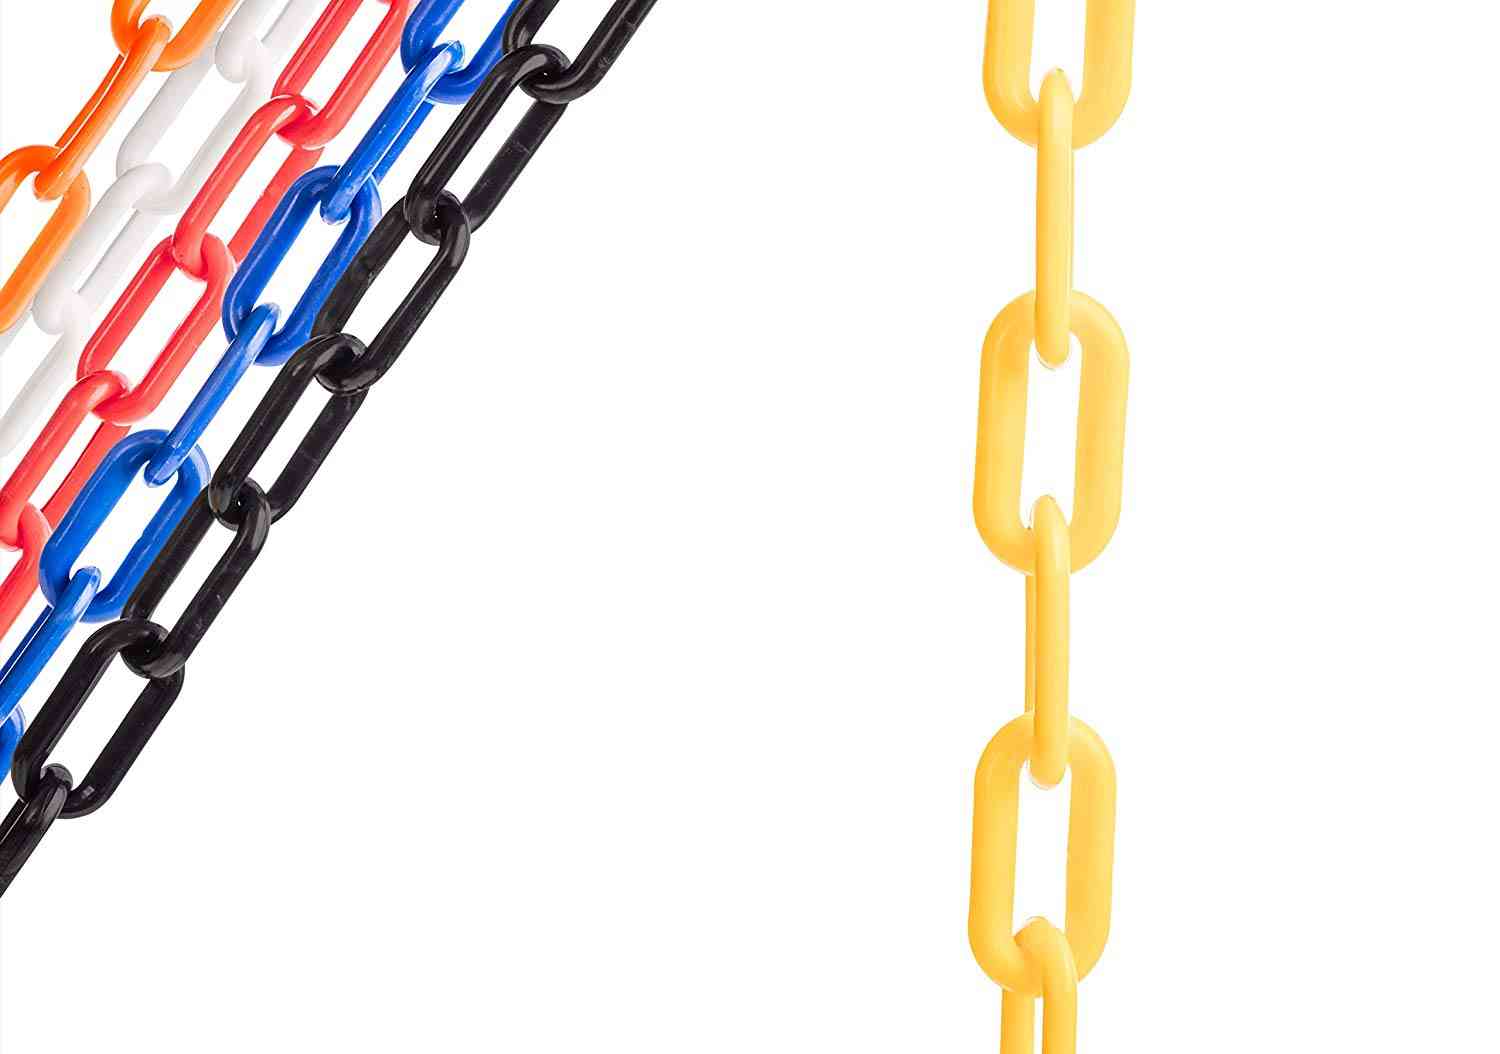 Uv Resistant, Plastic Chain Links For Crowd Control, Halloween, Prop